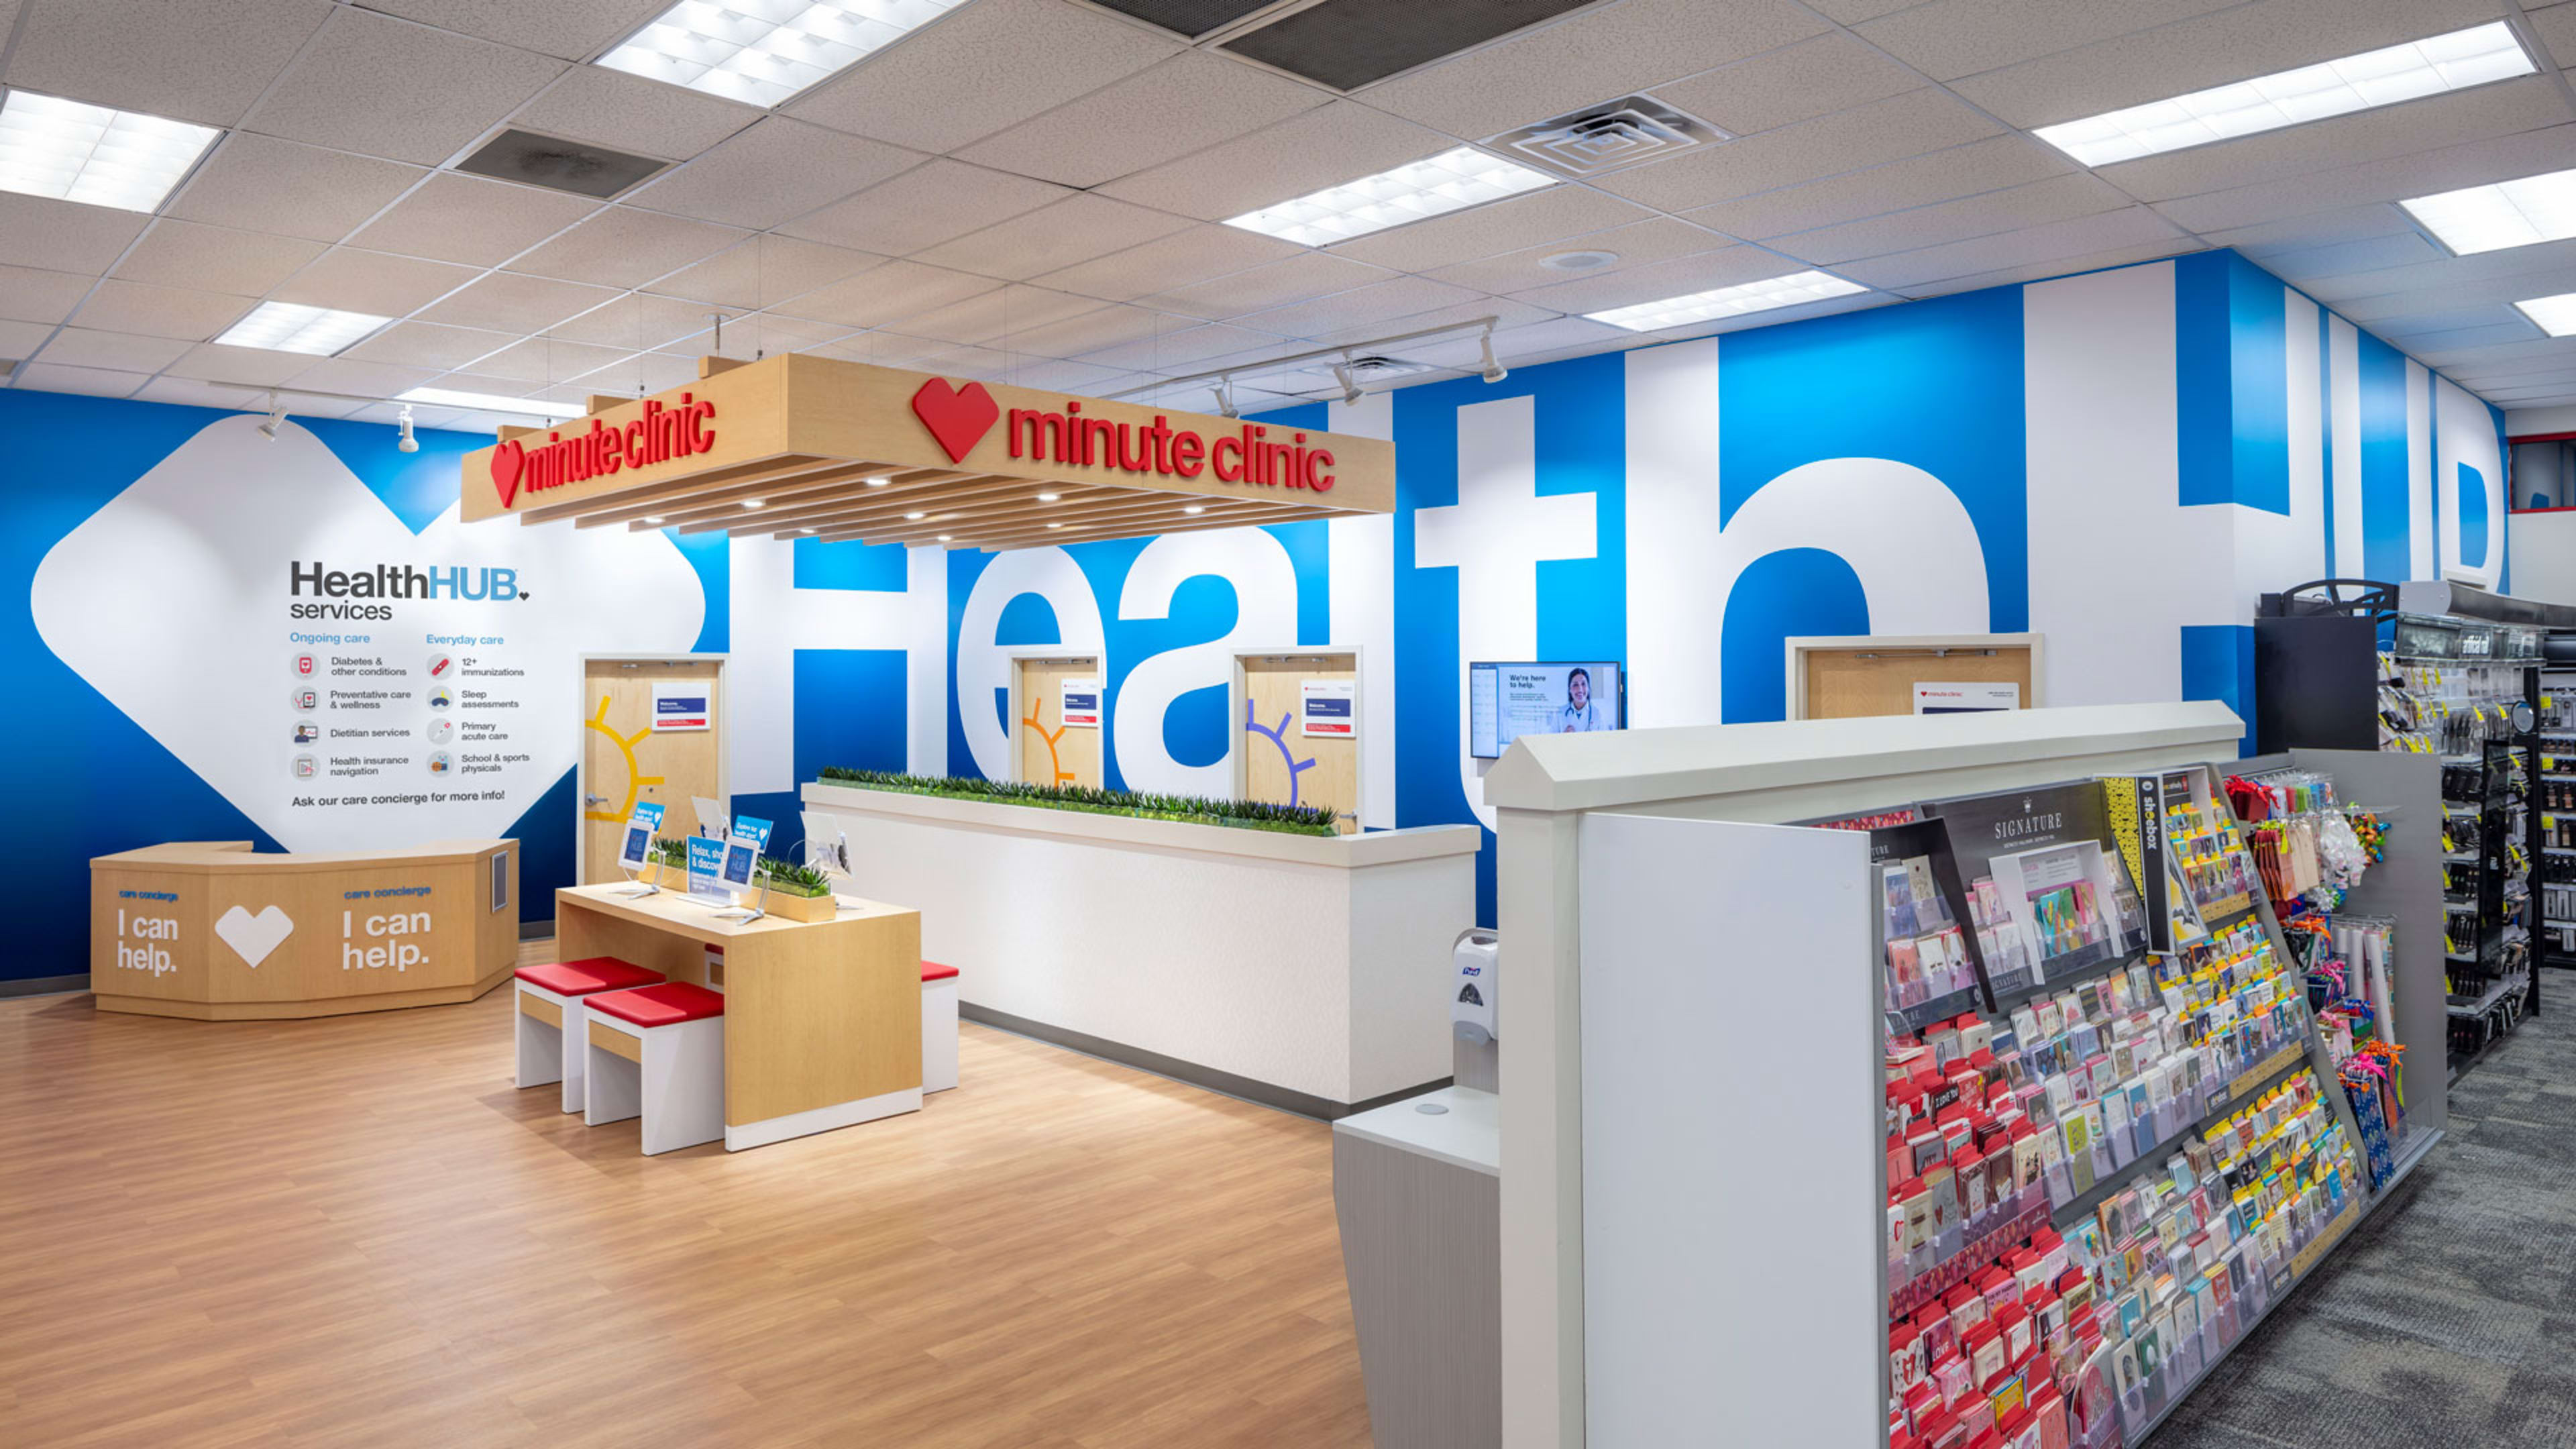 Yoga class while waiting for refills? CVS tests new “health hubs”